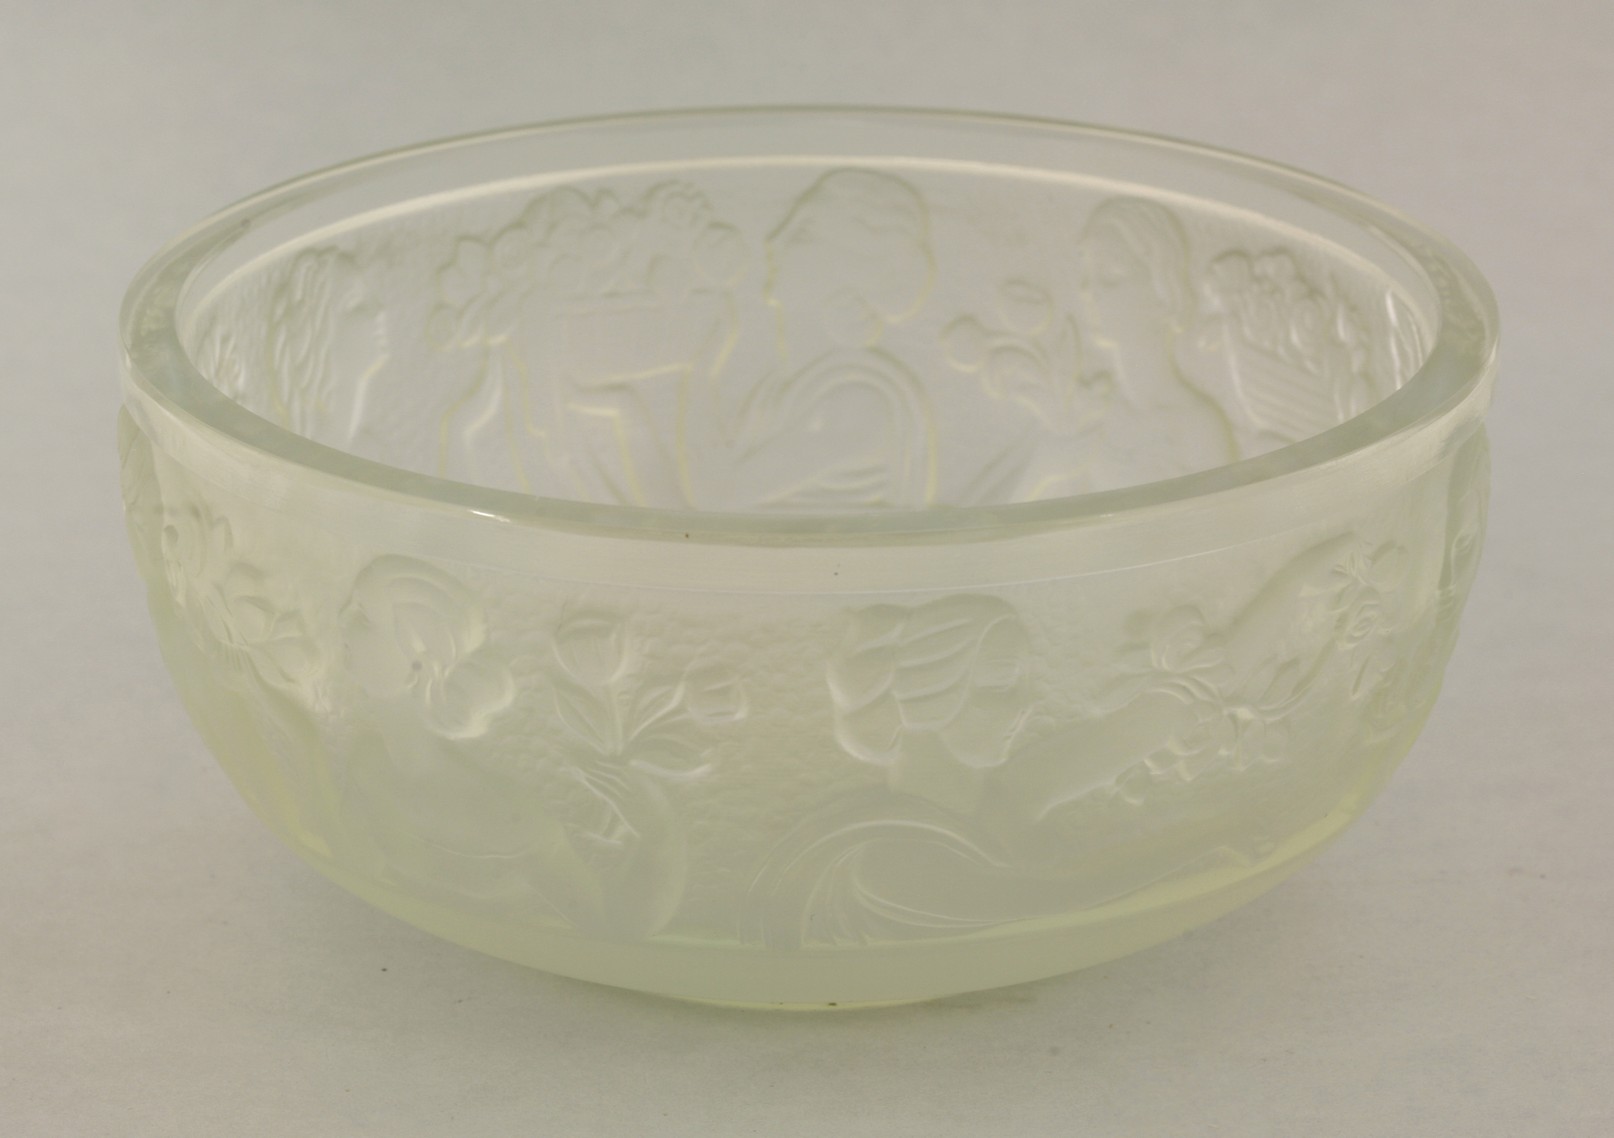 A Sabino opalescent glass bowl,
moulded with a band of ladies admiring flowers in low relief,